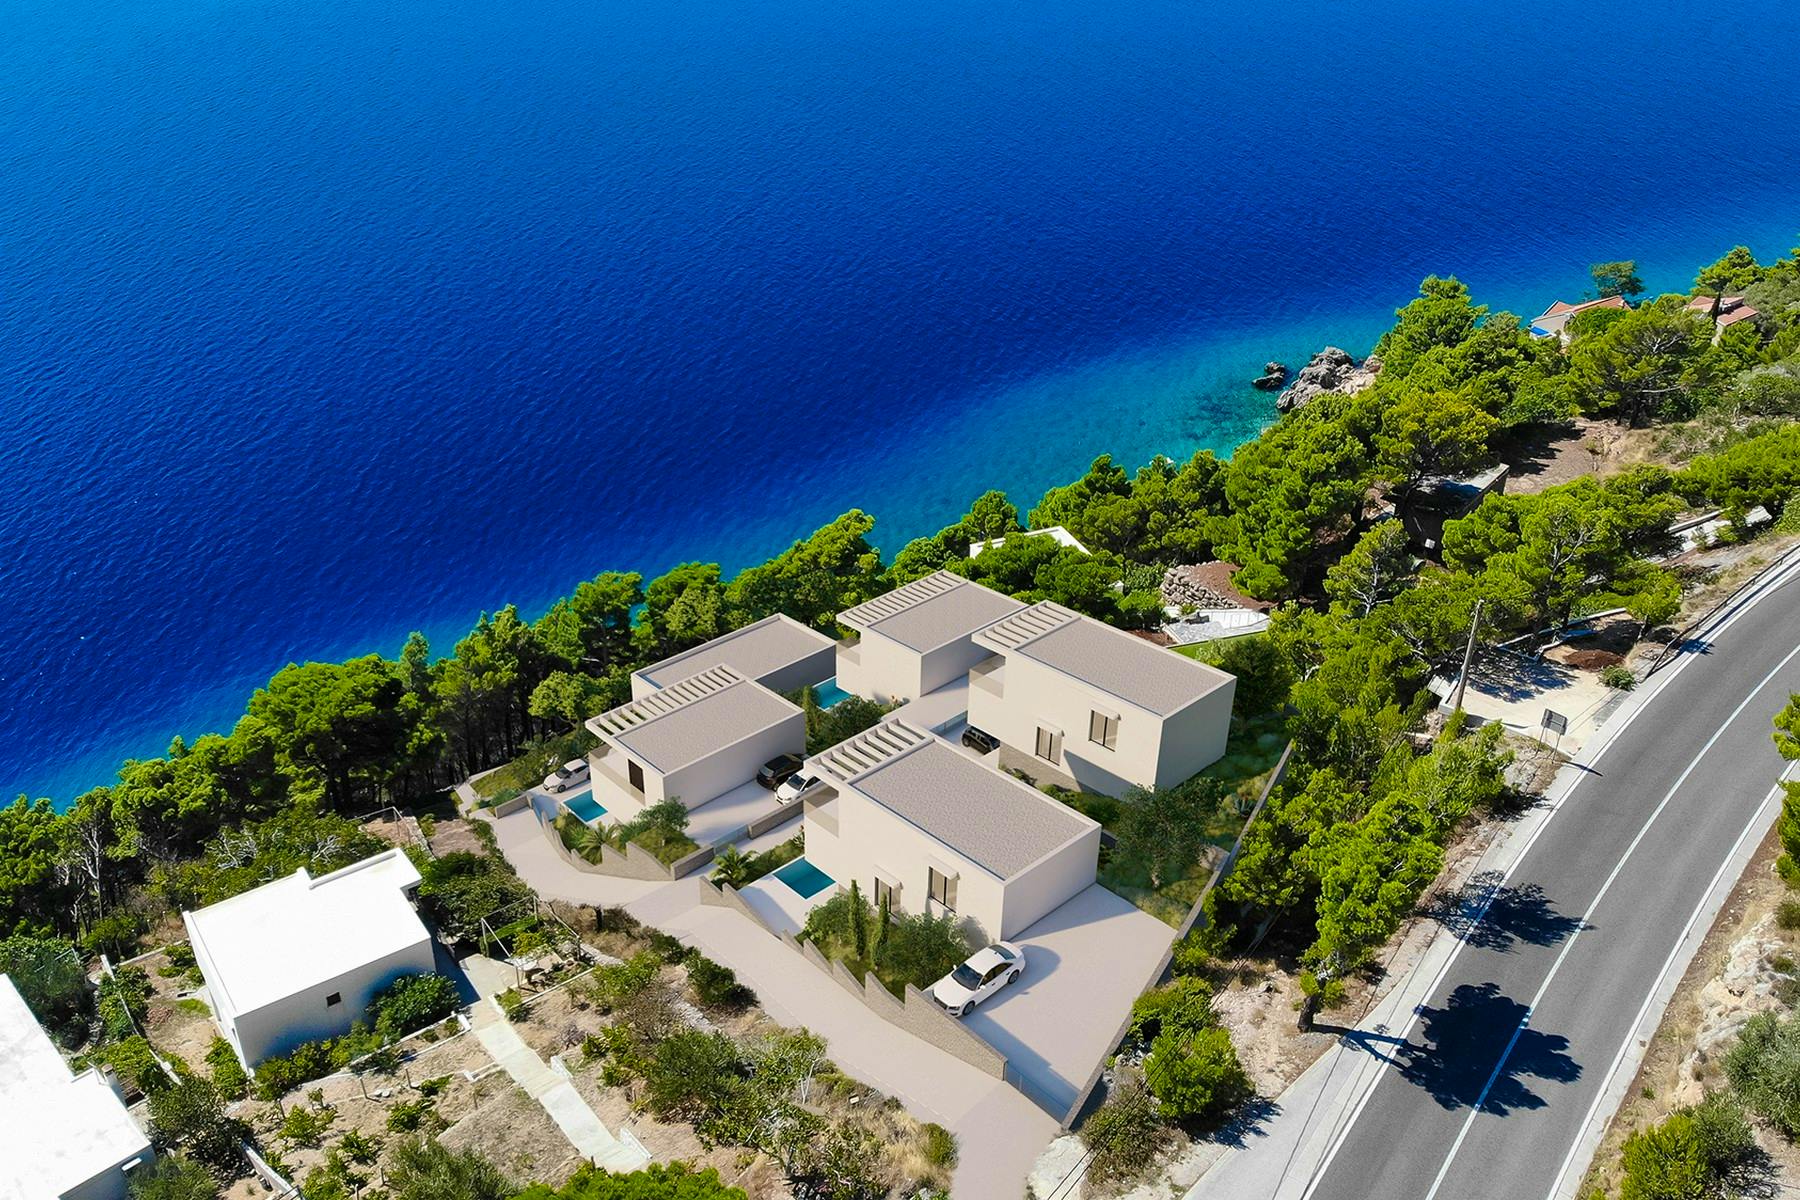 Visualizations of villas with spectacular sea view near Omiš